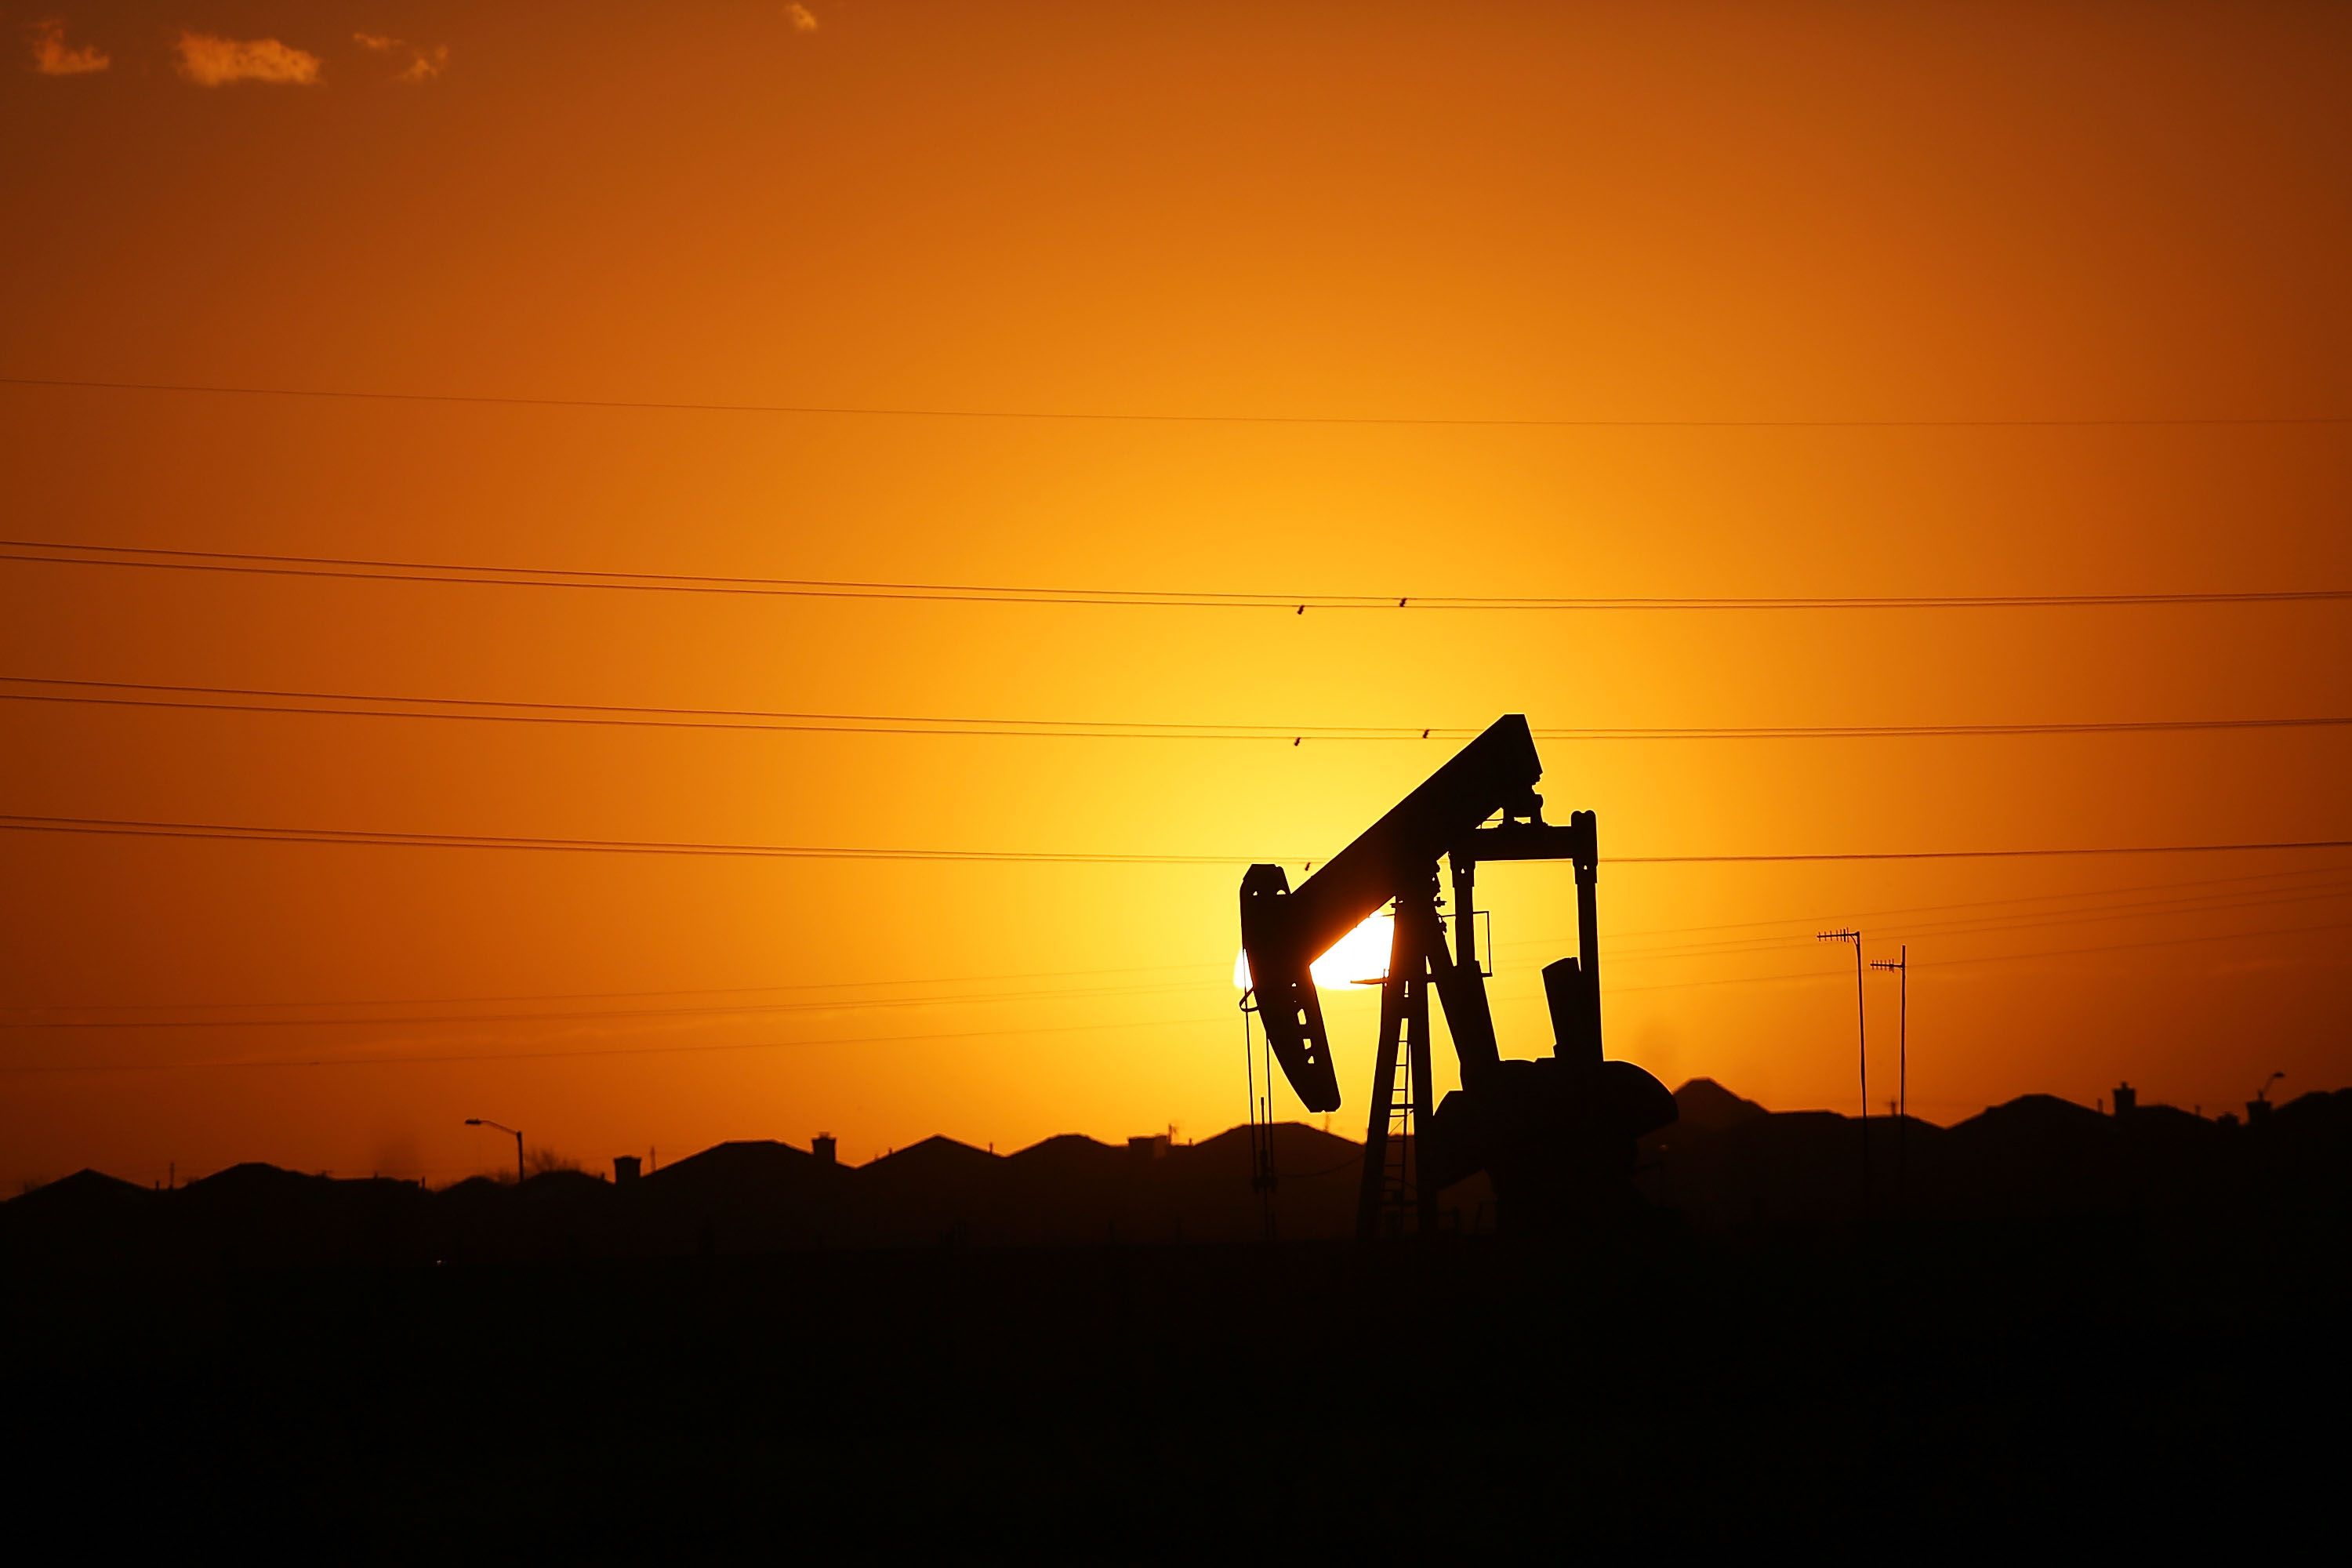 MIDLAND, TX - JANUARY 20: A pumpjack sits on the outskirts of town at dawn in the Permian Basin oil field on January 21, 2016 in the oil town of Midland, Texas. Despite recent drops in the price of oil, many residents of Andrews, and similar towns across the Permian, are trying to take the long view and stay optimistic. The Dow Jones industrial average plunged 540 points on Wednesday after crude oil plummeted another 7% and crashed below $27 a barrel. Spencer Platt/Getty Images/AFP == FOR NEWSPAPERS, INTERNET, TELCOS & TELEVISION USE ONLY ==